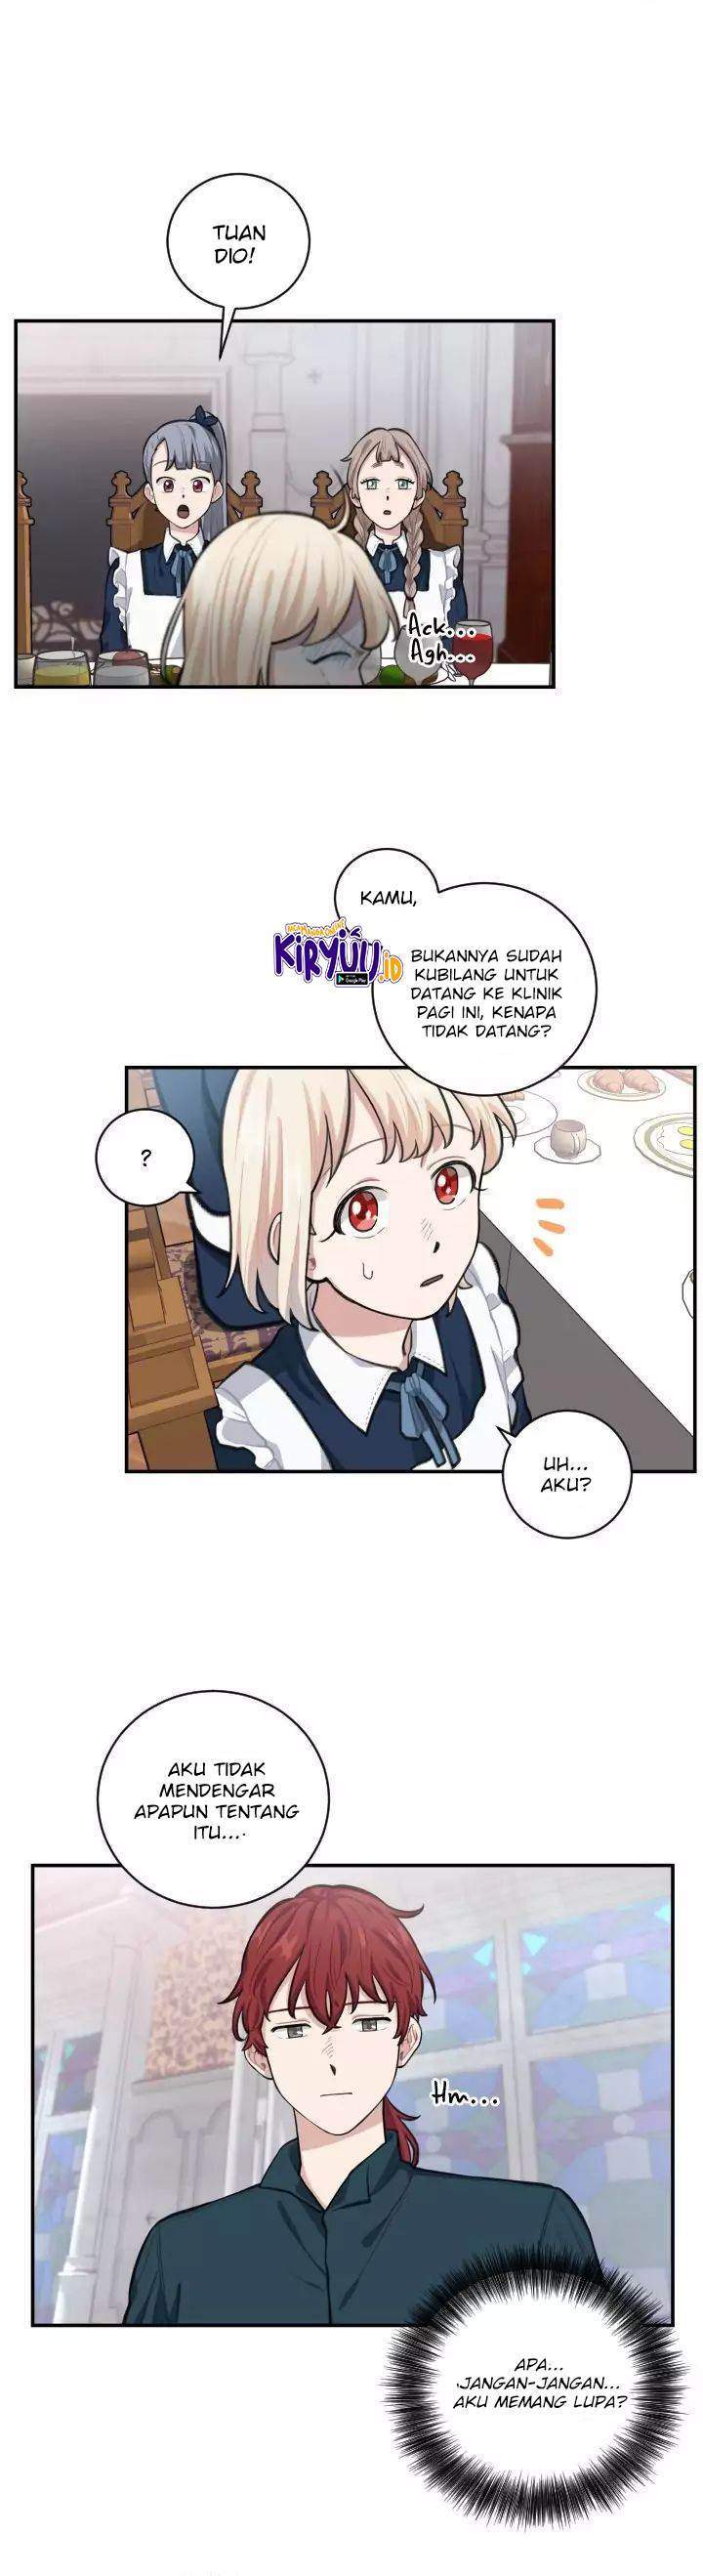 I Became a Maid in a TL Novel Chapter 5 11